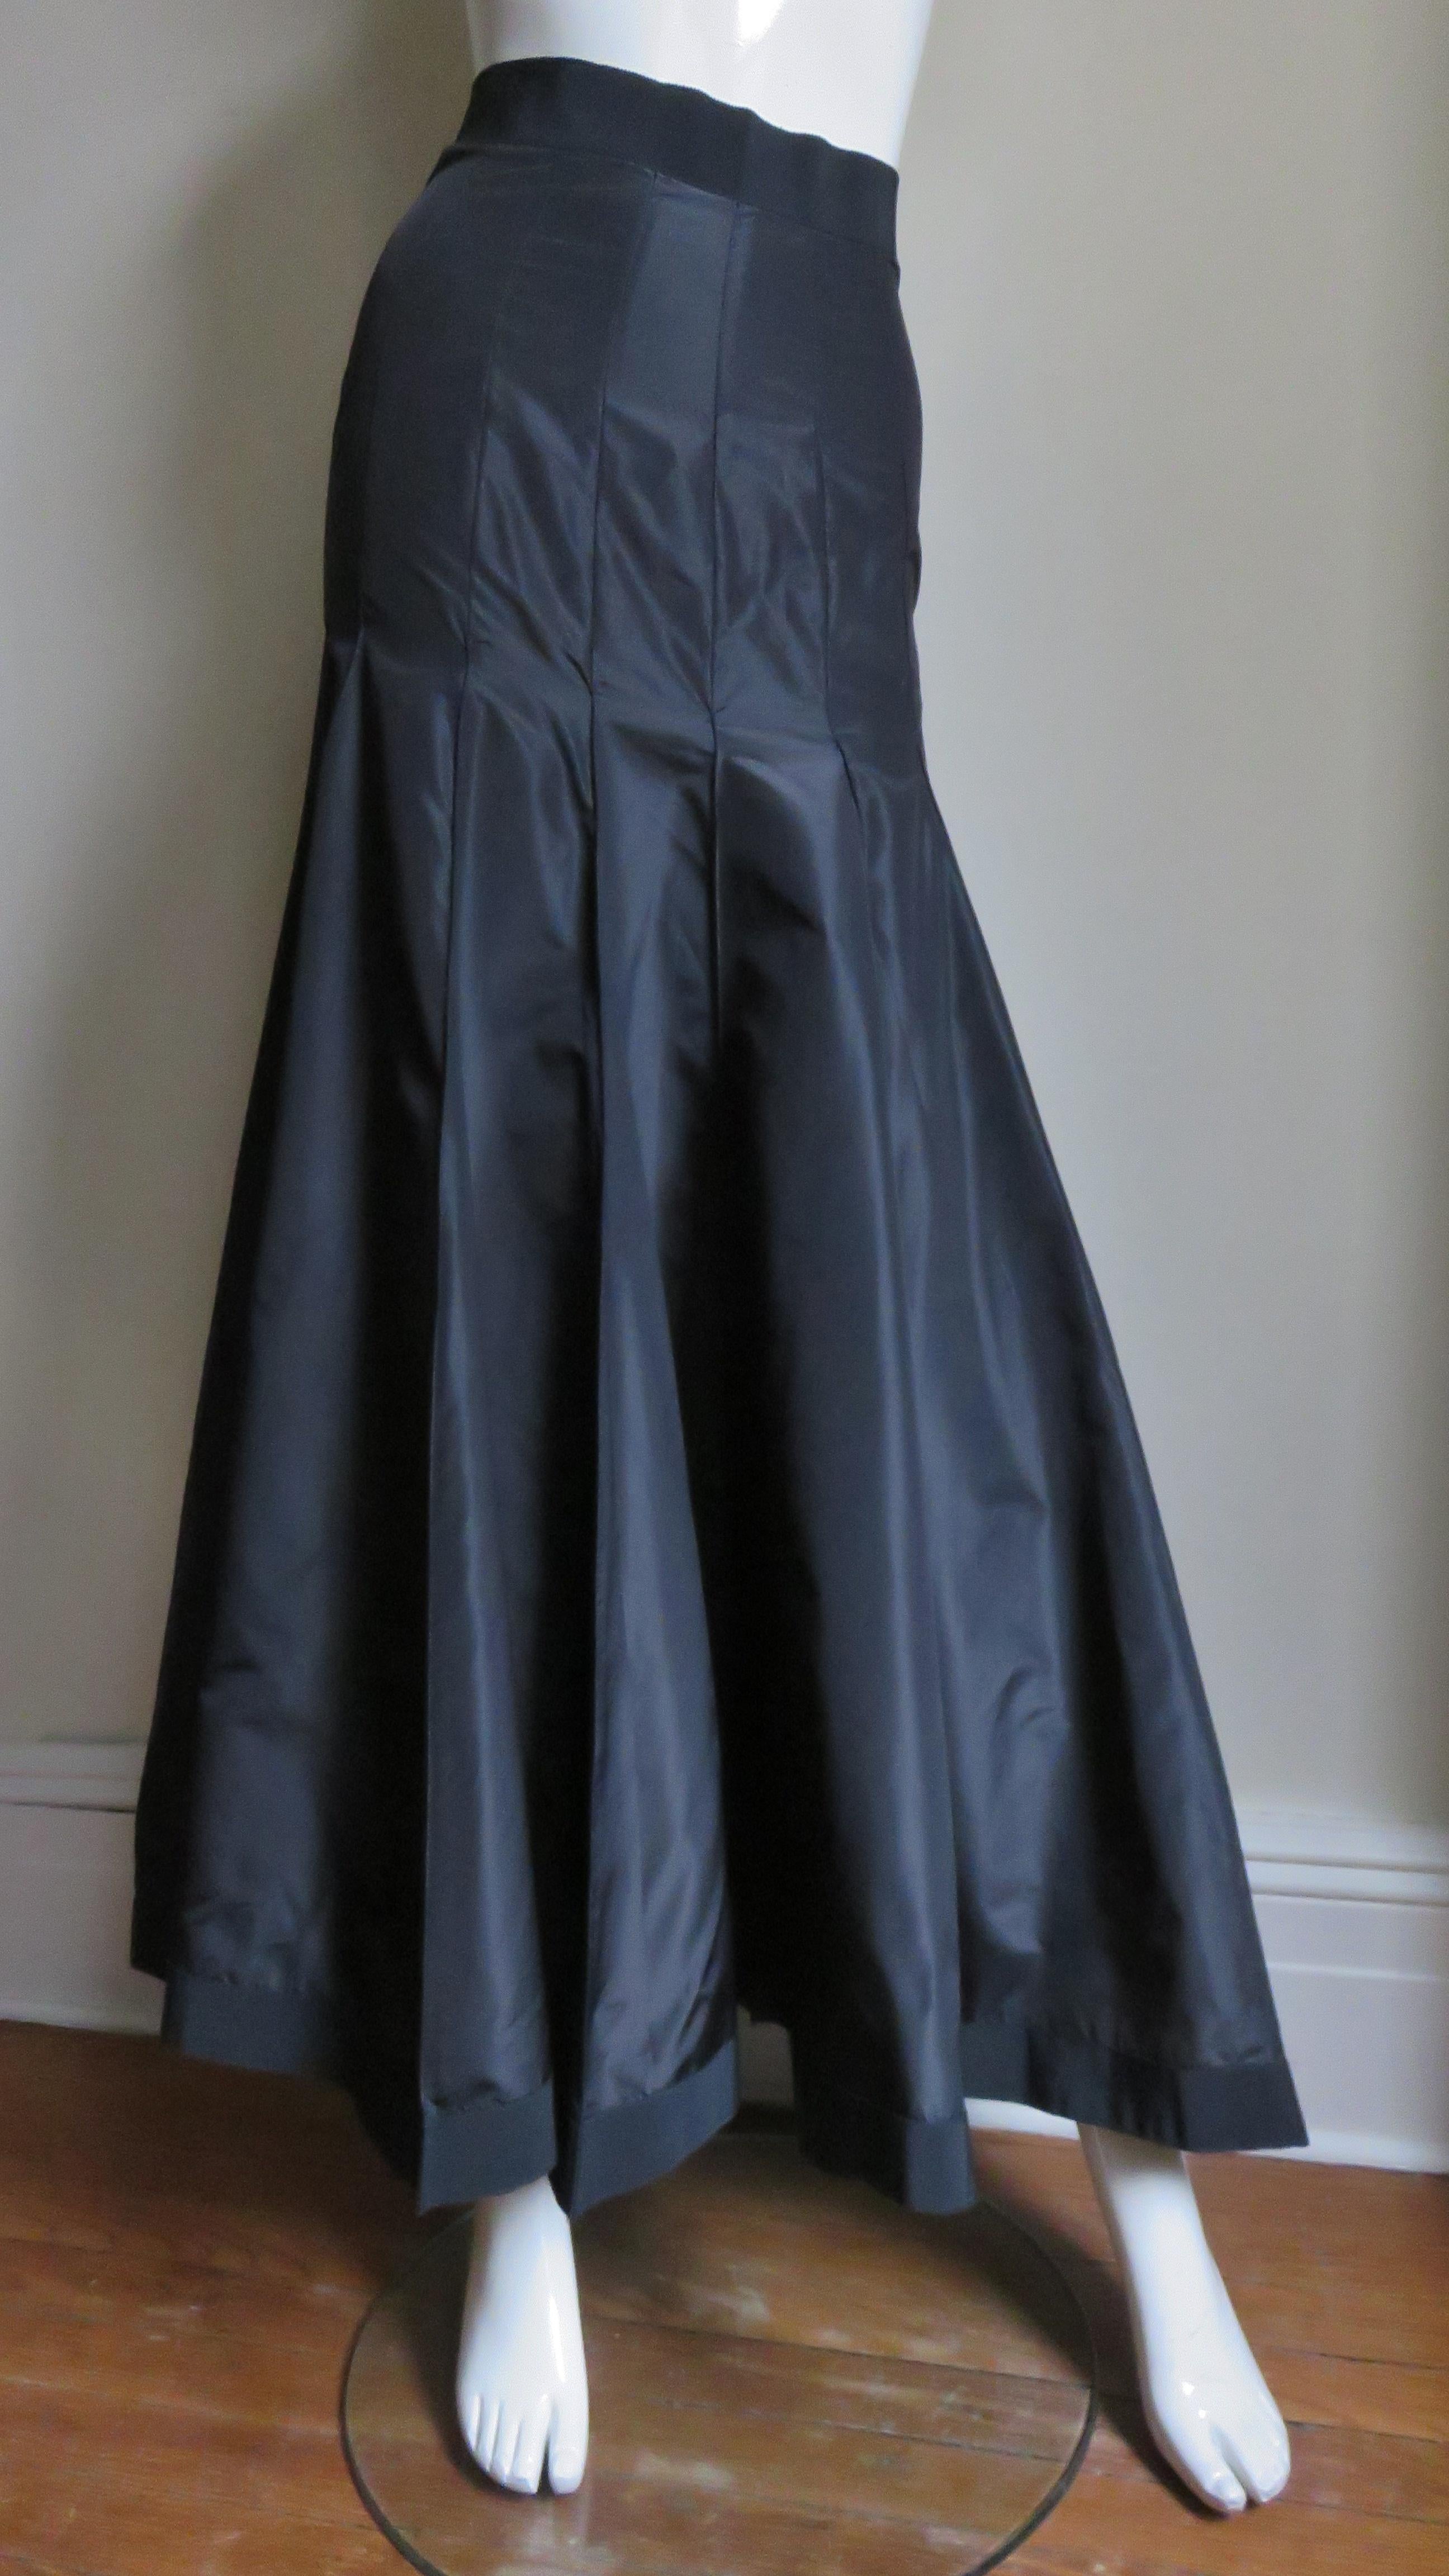 A beautiful black silk taffeta skirt from Angelo Tarlazzi.  It has a grosgrain waistband and vertical panels semi fitted though to the hips then flaring to the hem.  The skirt has grosgrain around the hem also and it is unlined with a center back